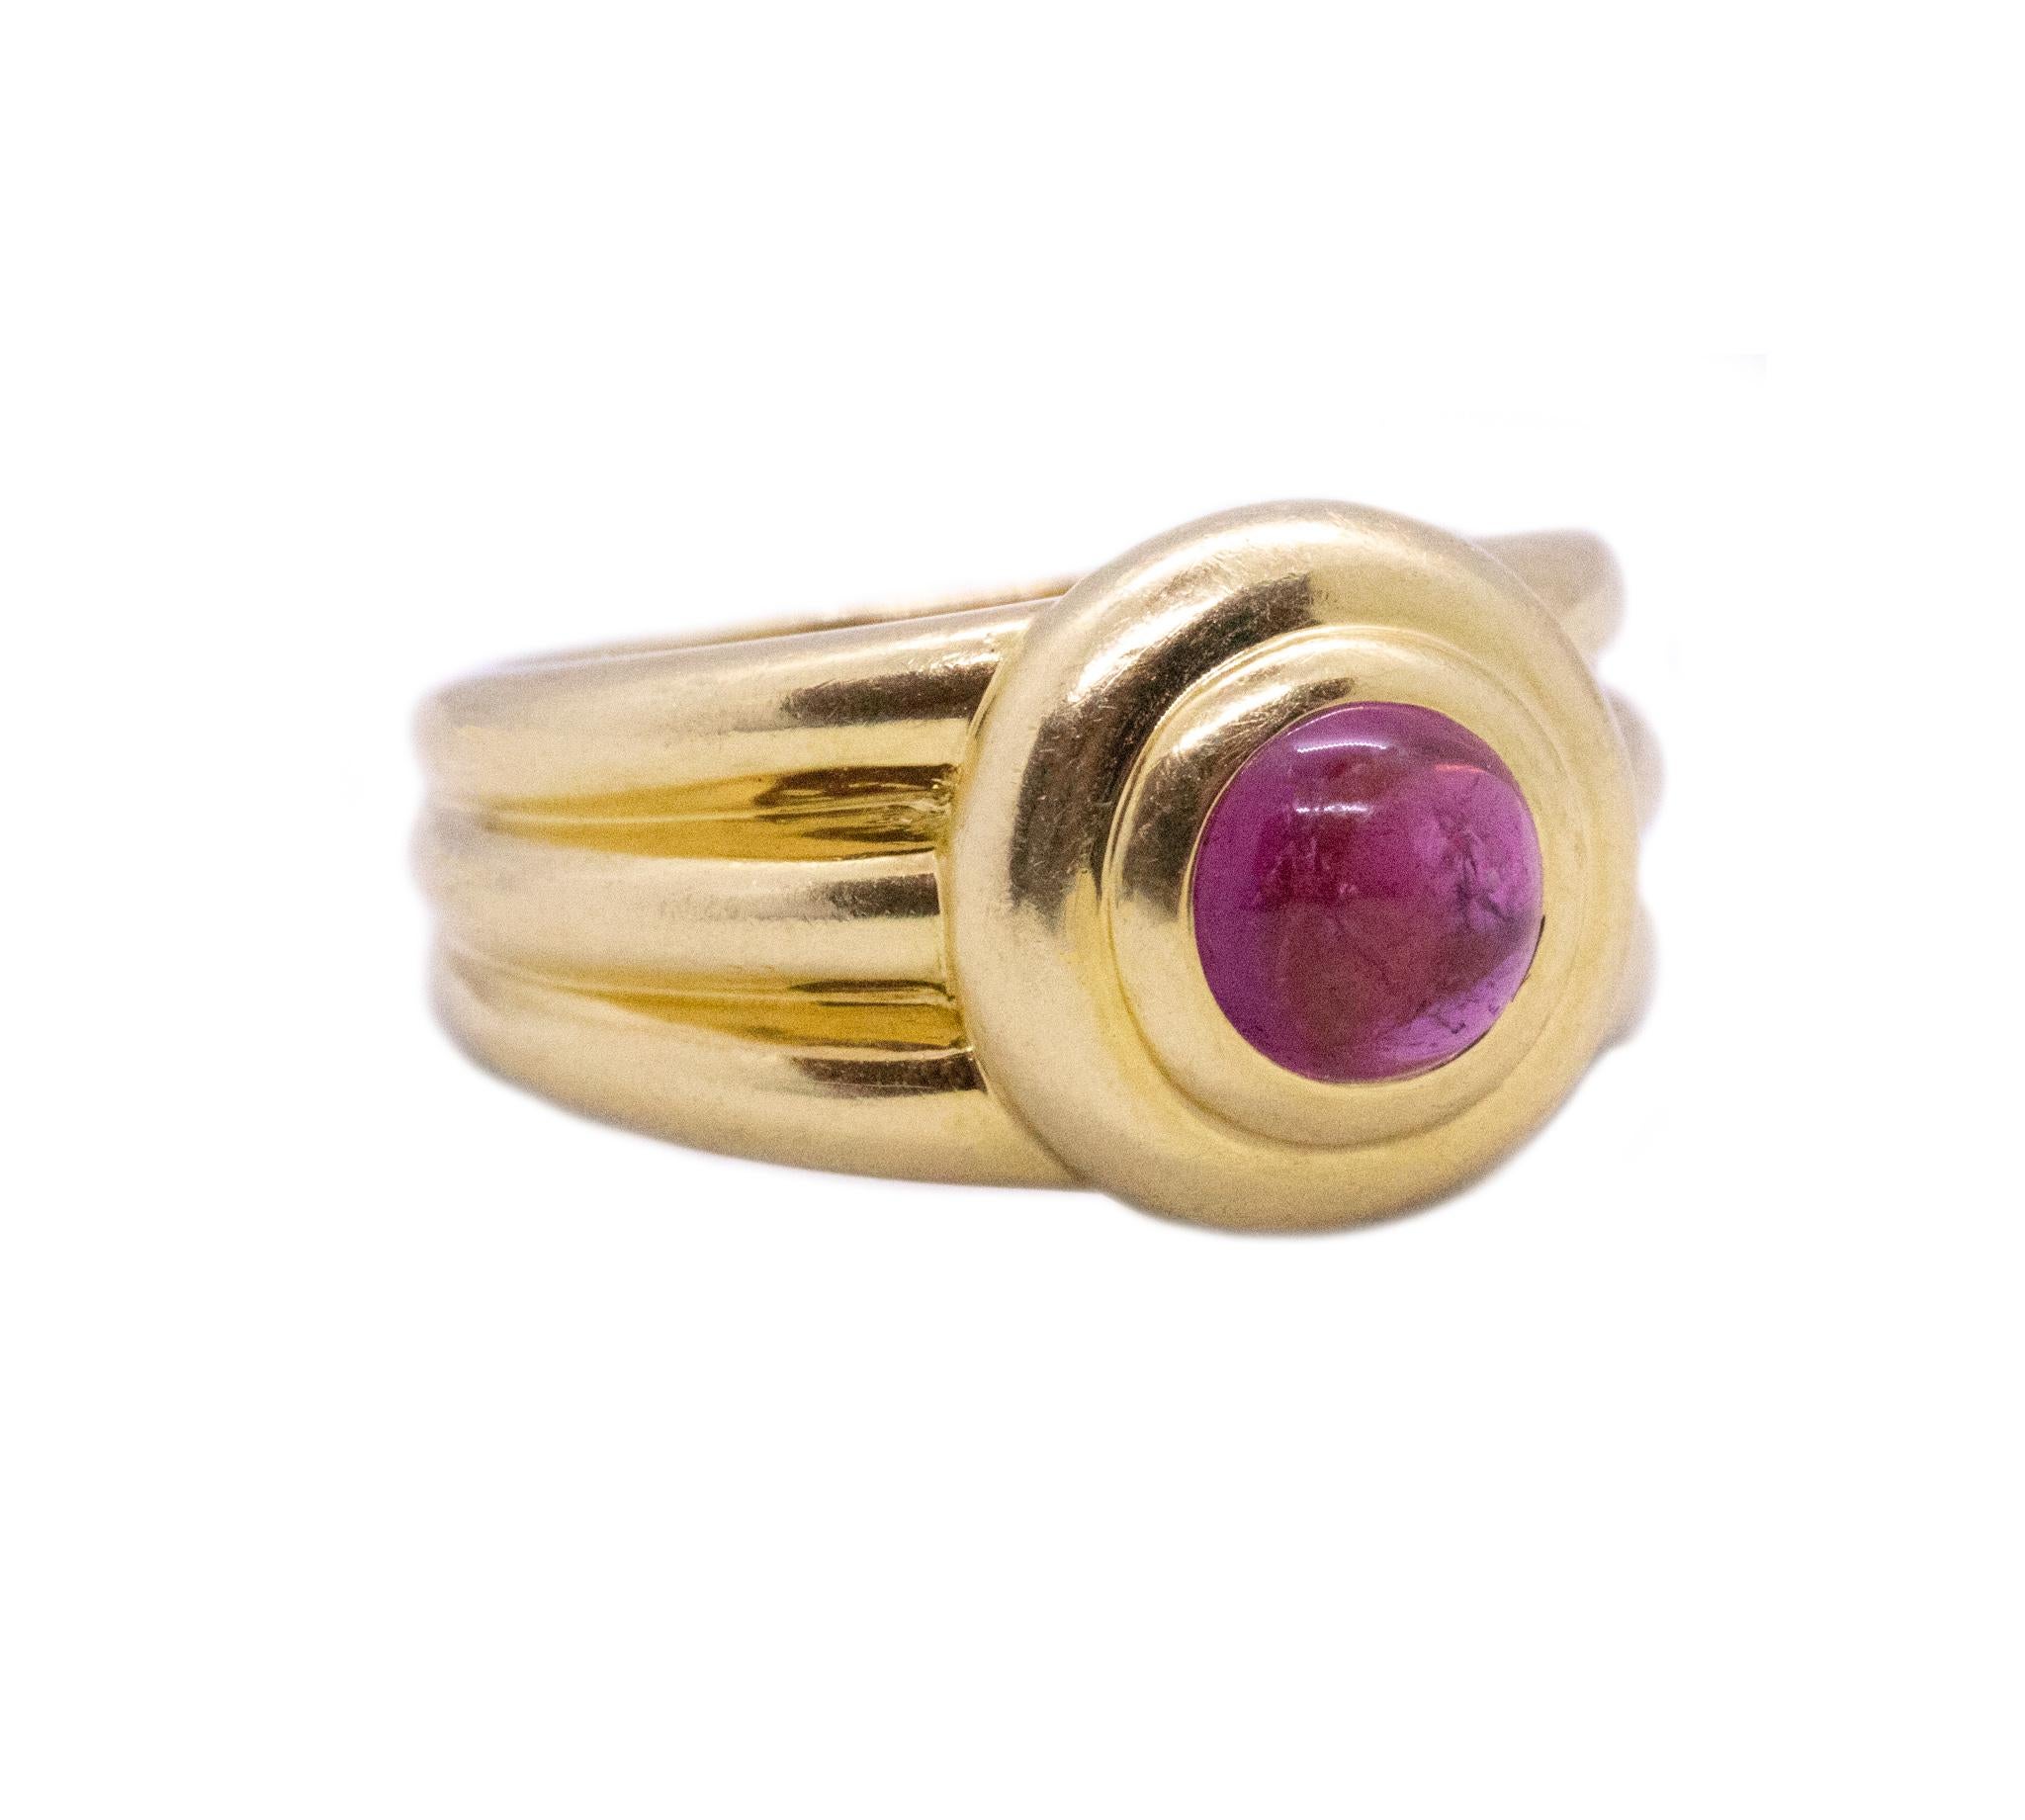 Retro Van Cleef & Arpels Classic Cocktail Ring 18Kt Gold With Natural Pink Tourmaline